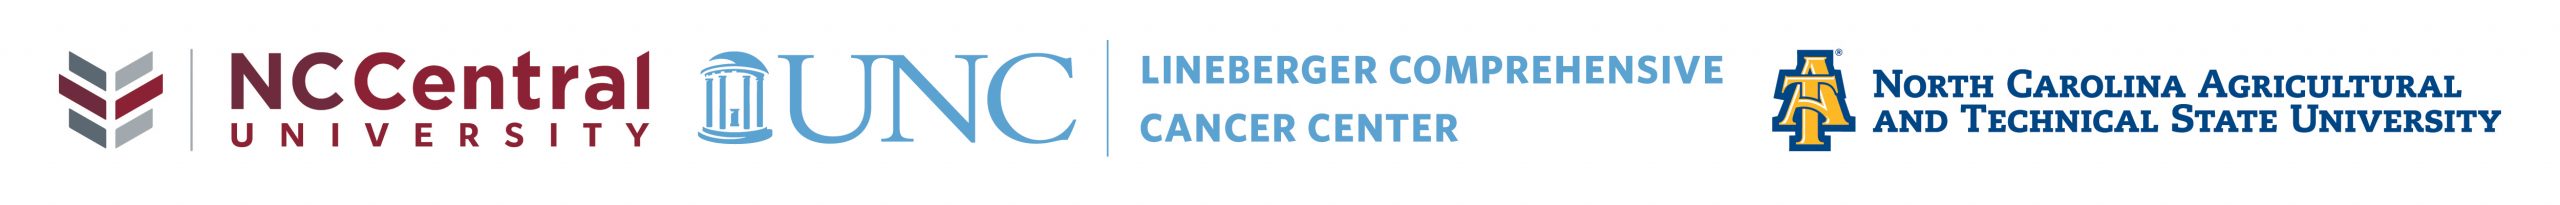 NC Central University, UNC Lineberger Comprehensive Cancer Center, North Carolina Agricultural and Technical State University